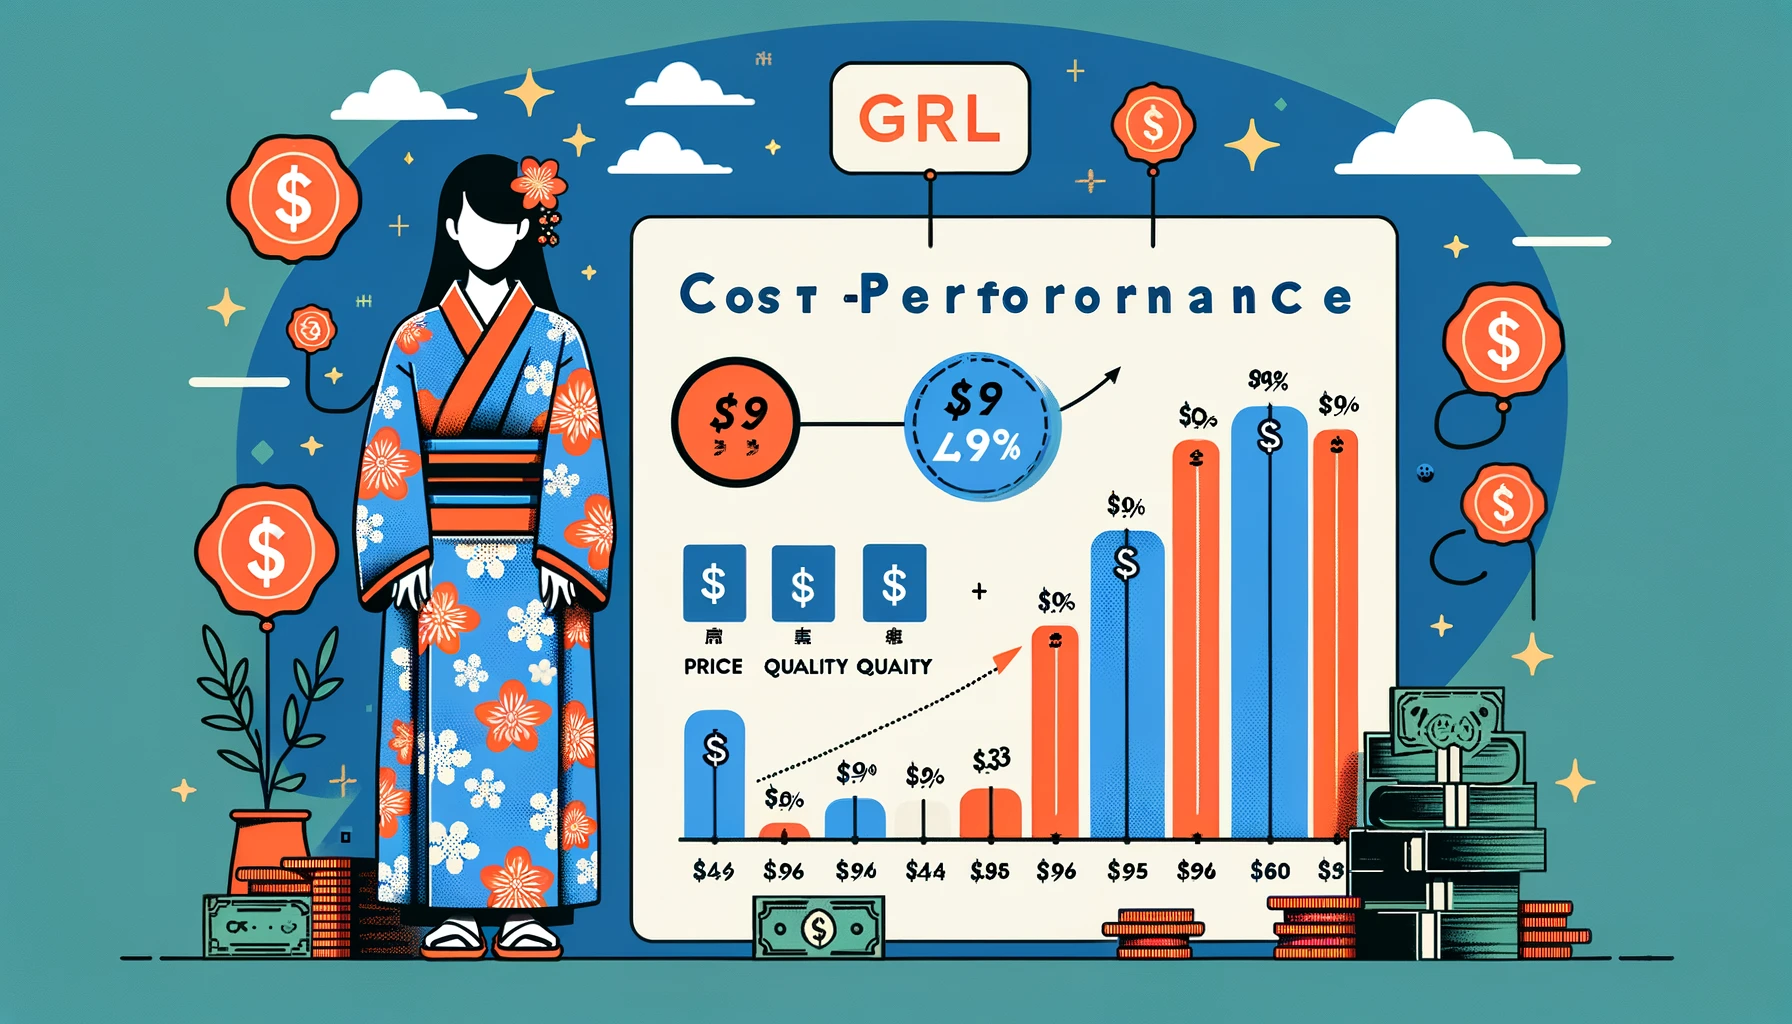 An illustration of the cost-performance aspect of GRL yukatas. The image includes a comparison chart or infographic showing the price and quality ratings of different yukata options from GRL. The background features elements representing value, such as money symbols and happy customers, with 'GRL' prominently displayed.